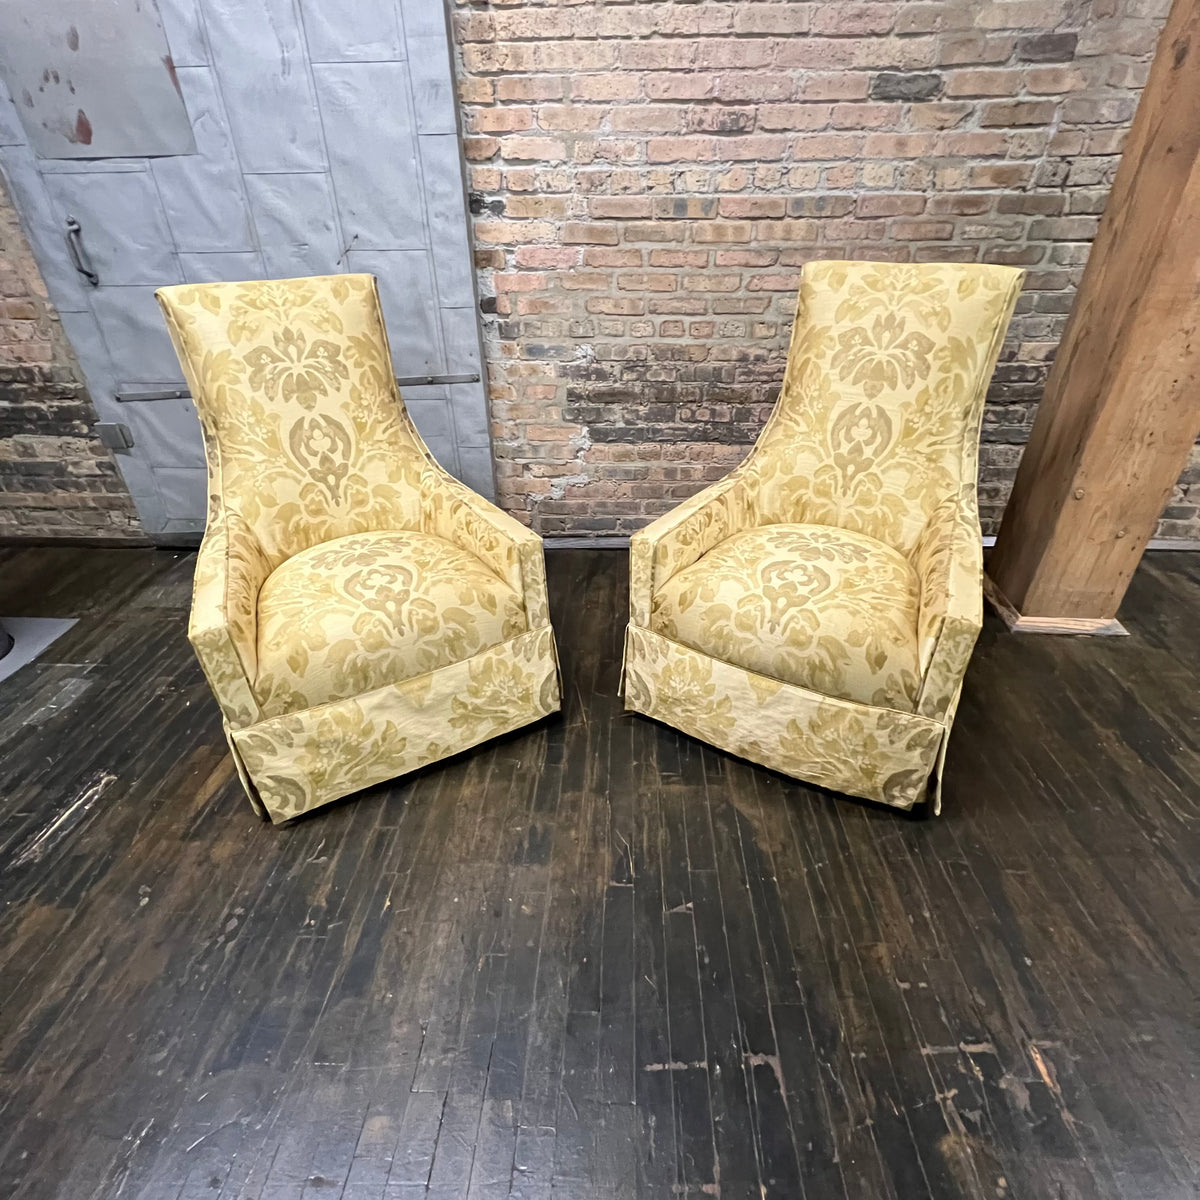 This lovely pair of high back lounge chairs circa 1960...have a slightly Adrian Pearsall shape. Silk upholstery in shades of gold.  STUDIO SONJA MILAN, Chicago, IL midcentury lounge chairs